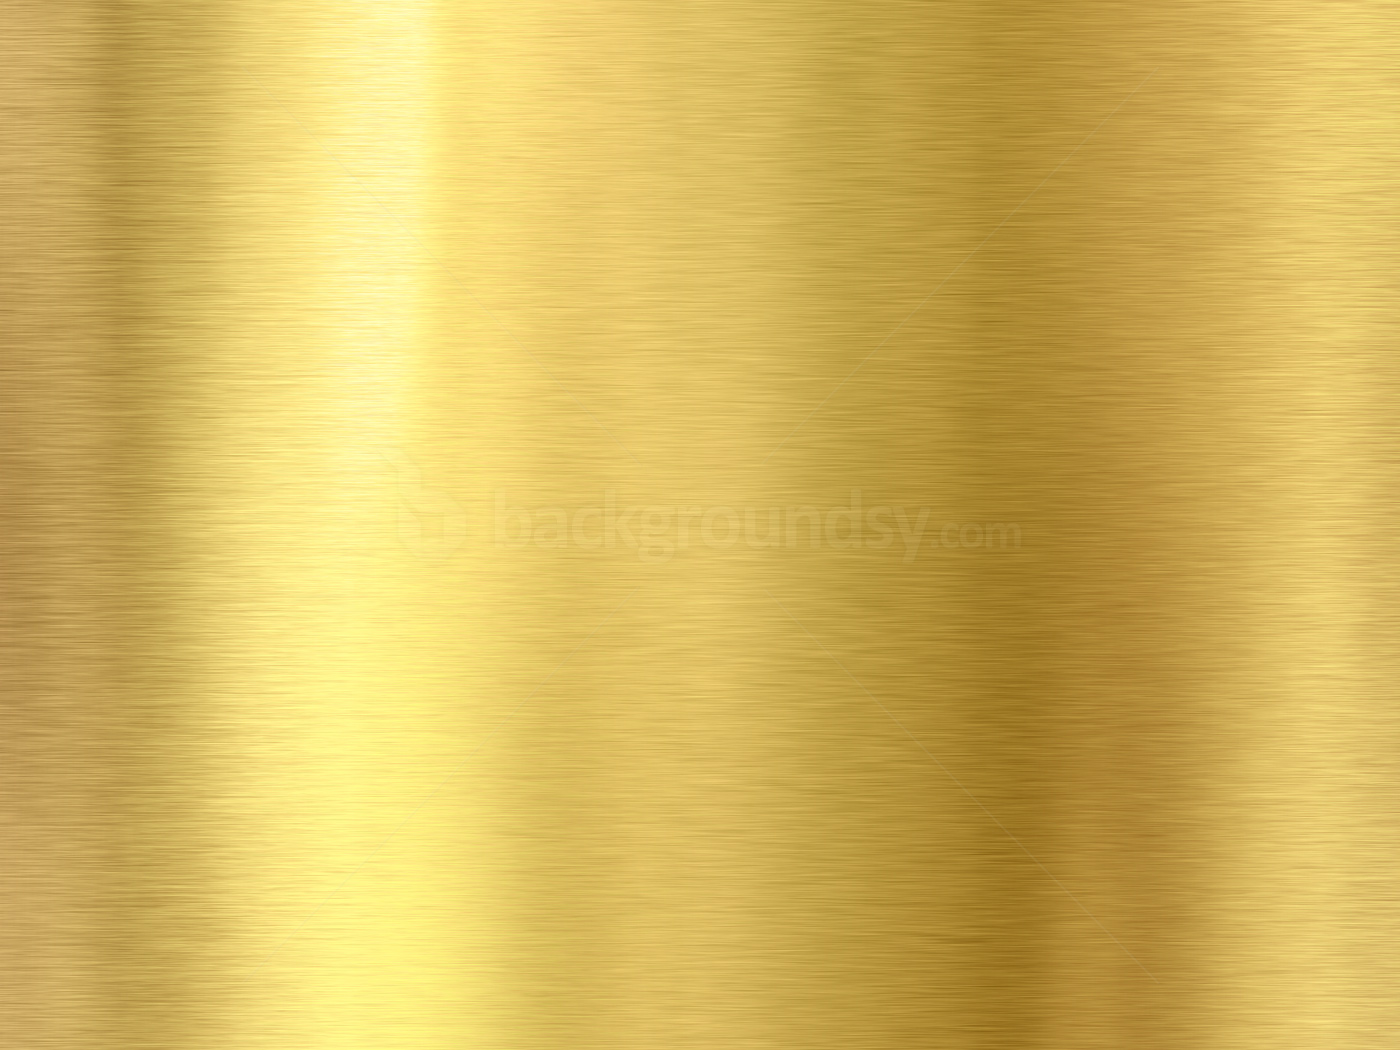 Shiny Gold Textures